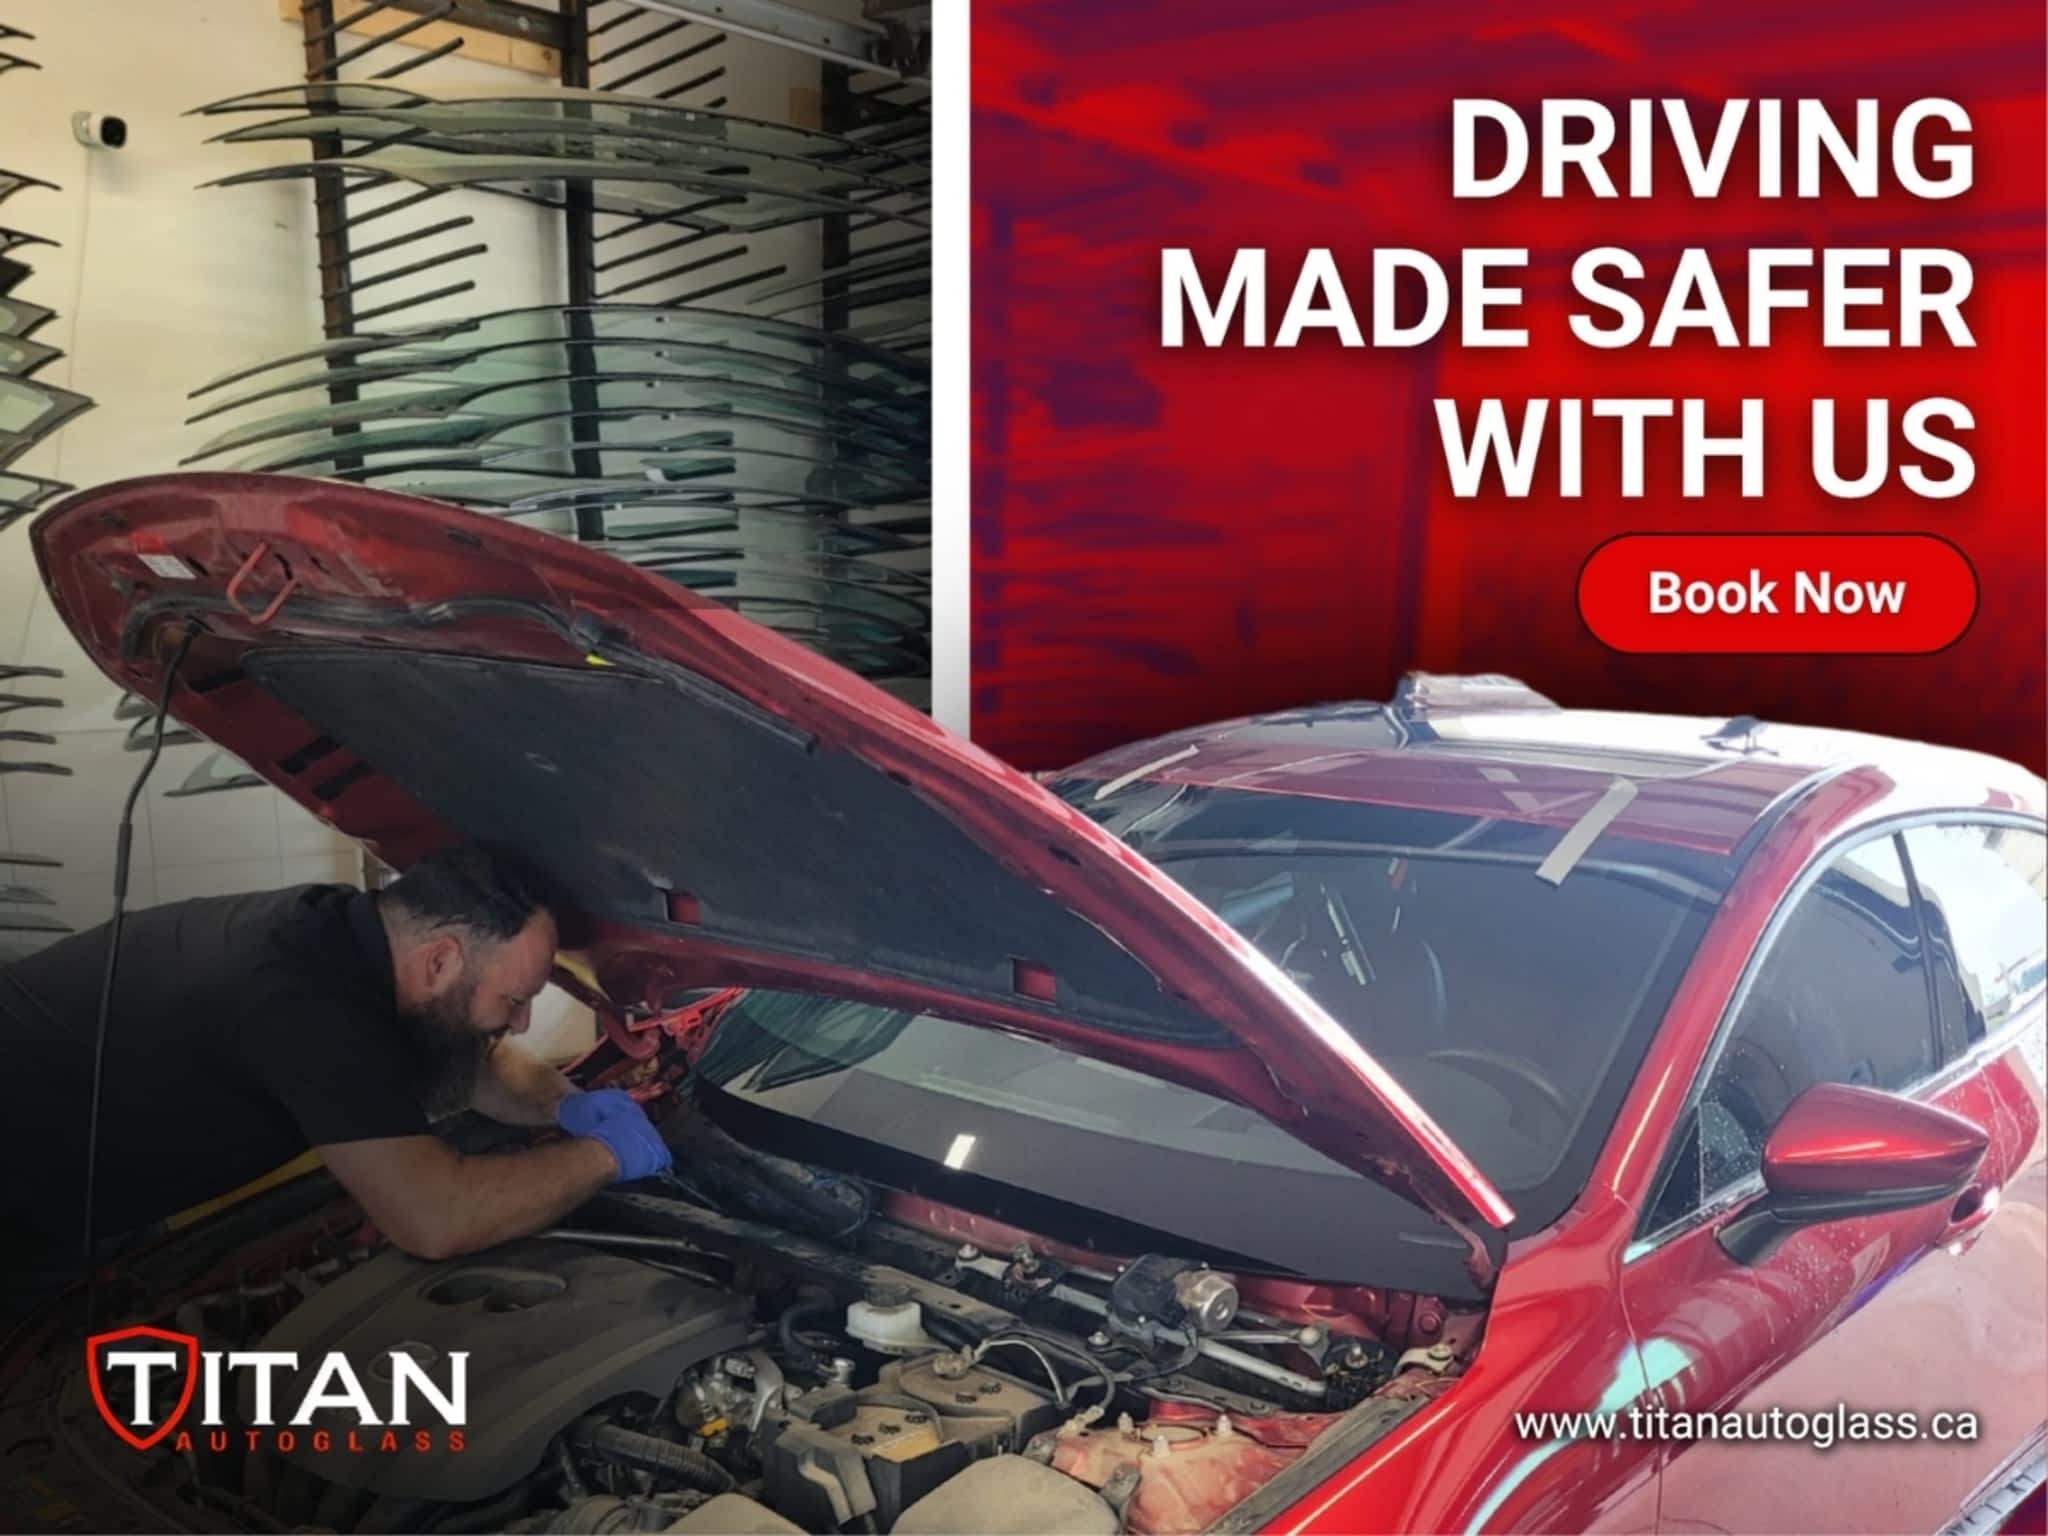 photo Titan Auto Glass Waterloo | Windshield Replacement and Auto Glass Repair